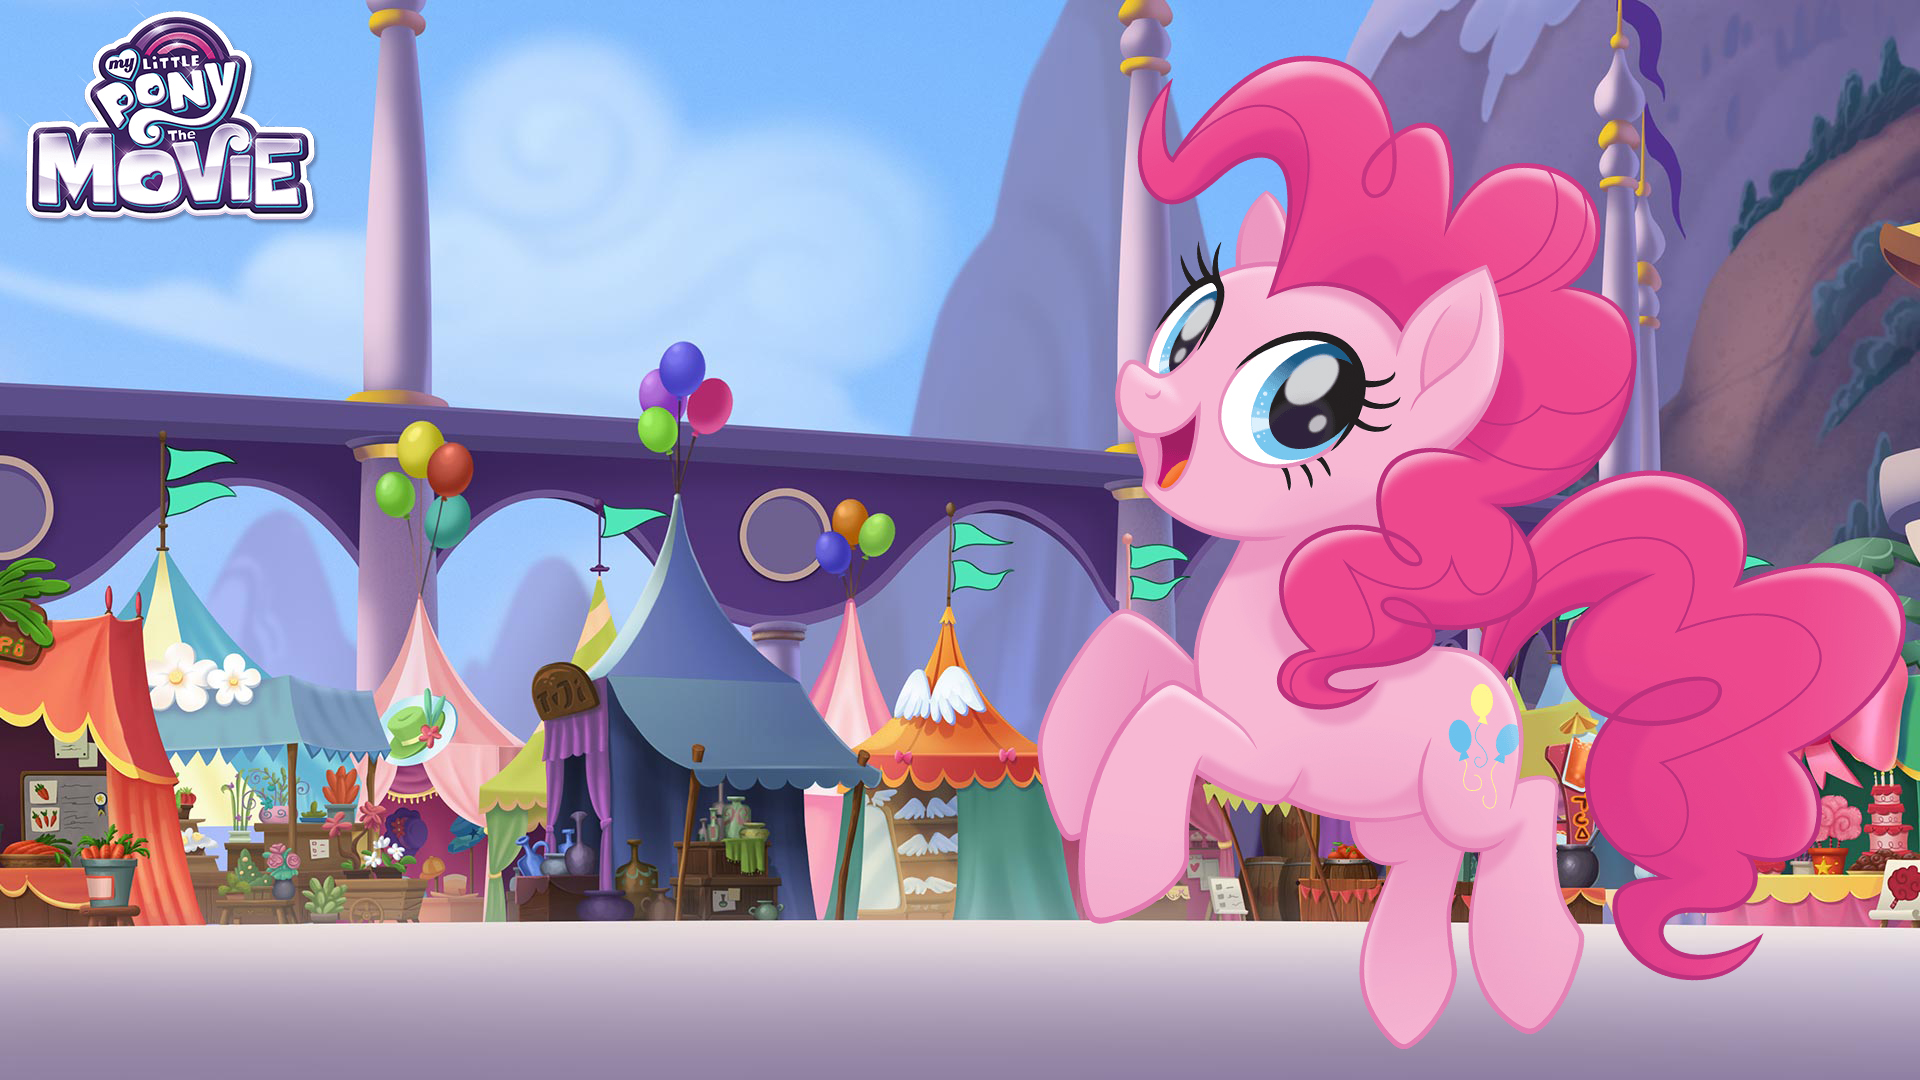 http://www.youloveit.com/uploads/posts/2017-08/1501837550_youloveit_com_my_little_pony_the_movie_wallpapers23.jpg